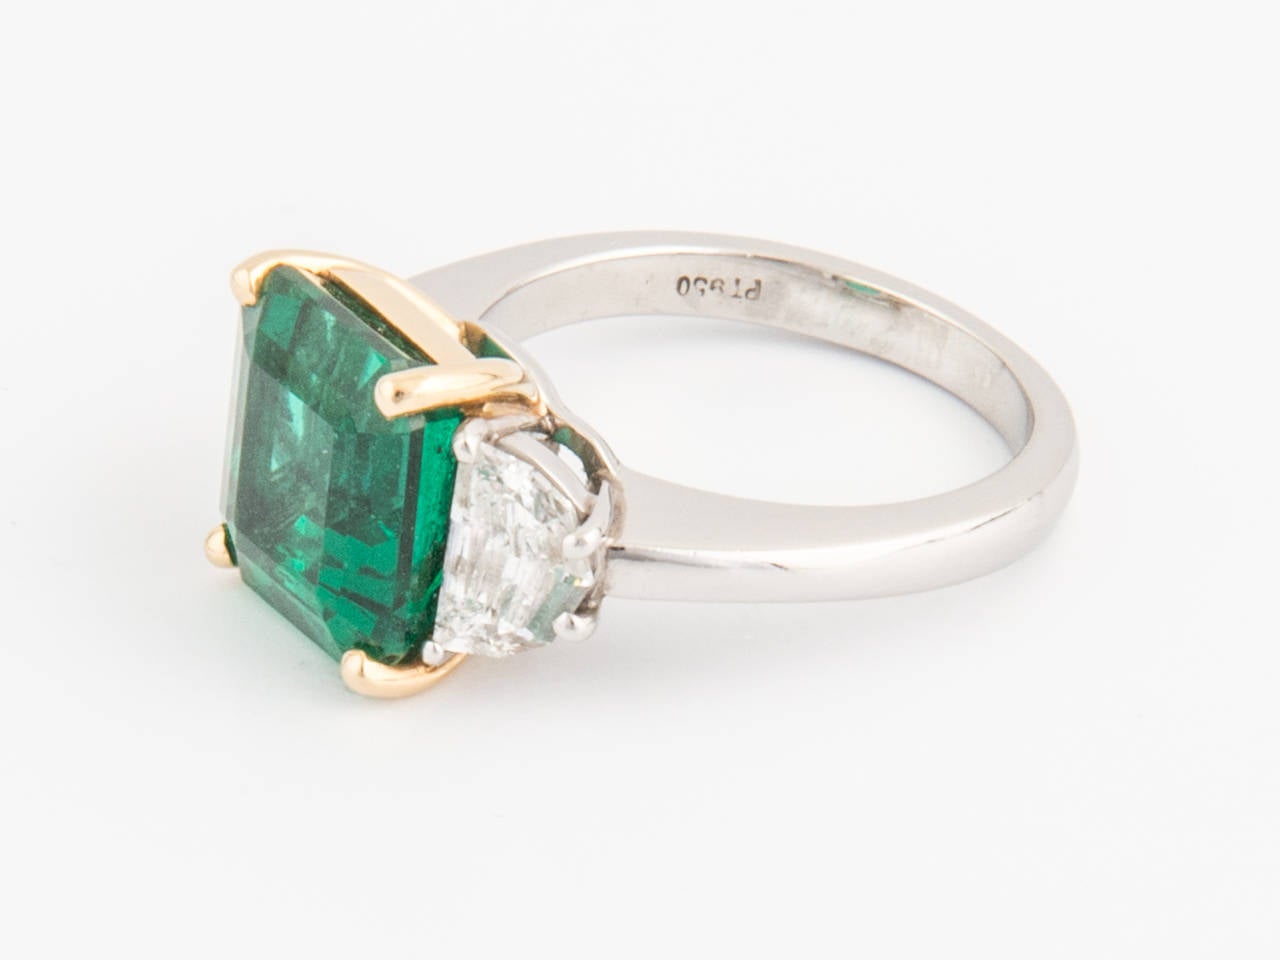 Ring, Platinum and 18k yellow gold, mounted with One emerald-cut Emerald (octagonal) natural color, weighing 4.01 carats (Russia-Ural) - GRS Certificate No. GRS2004-040769- And 2 diamonds shields, weighing 0.72 carats-Rare Natural Emerald, with a